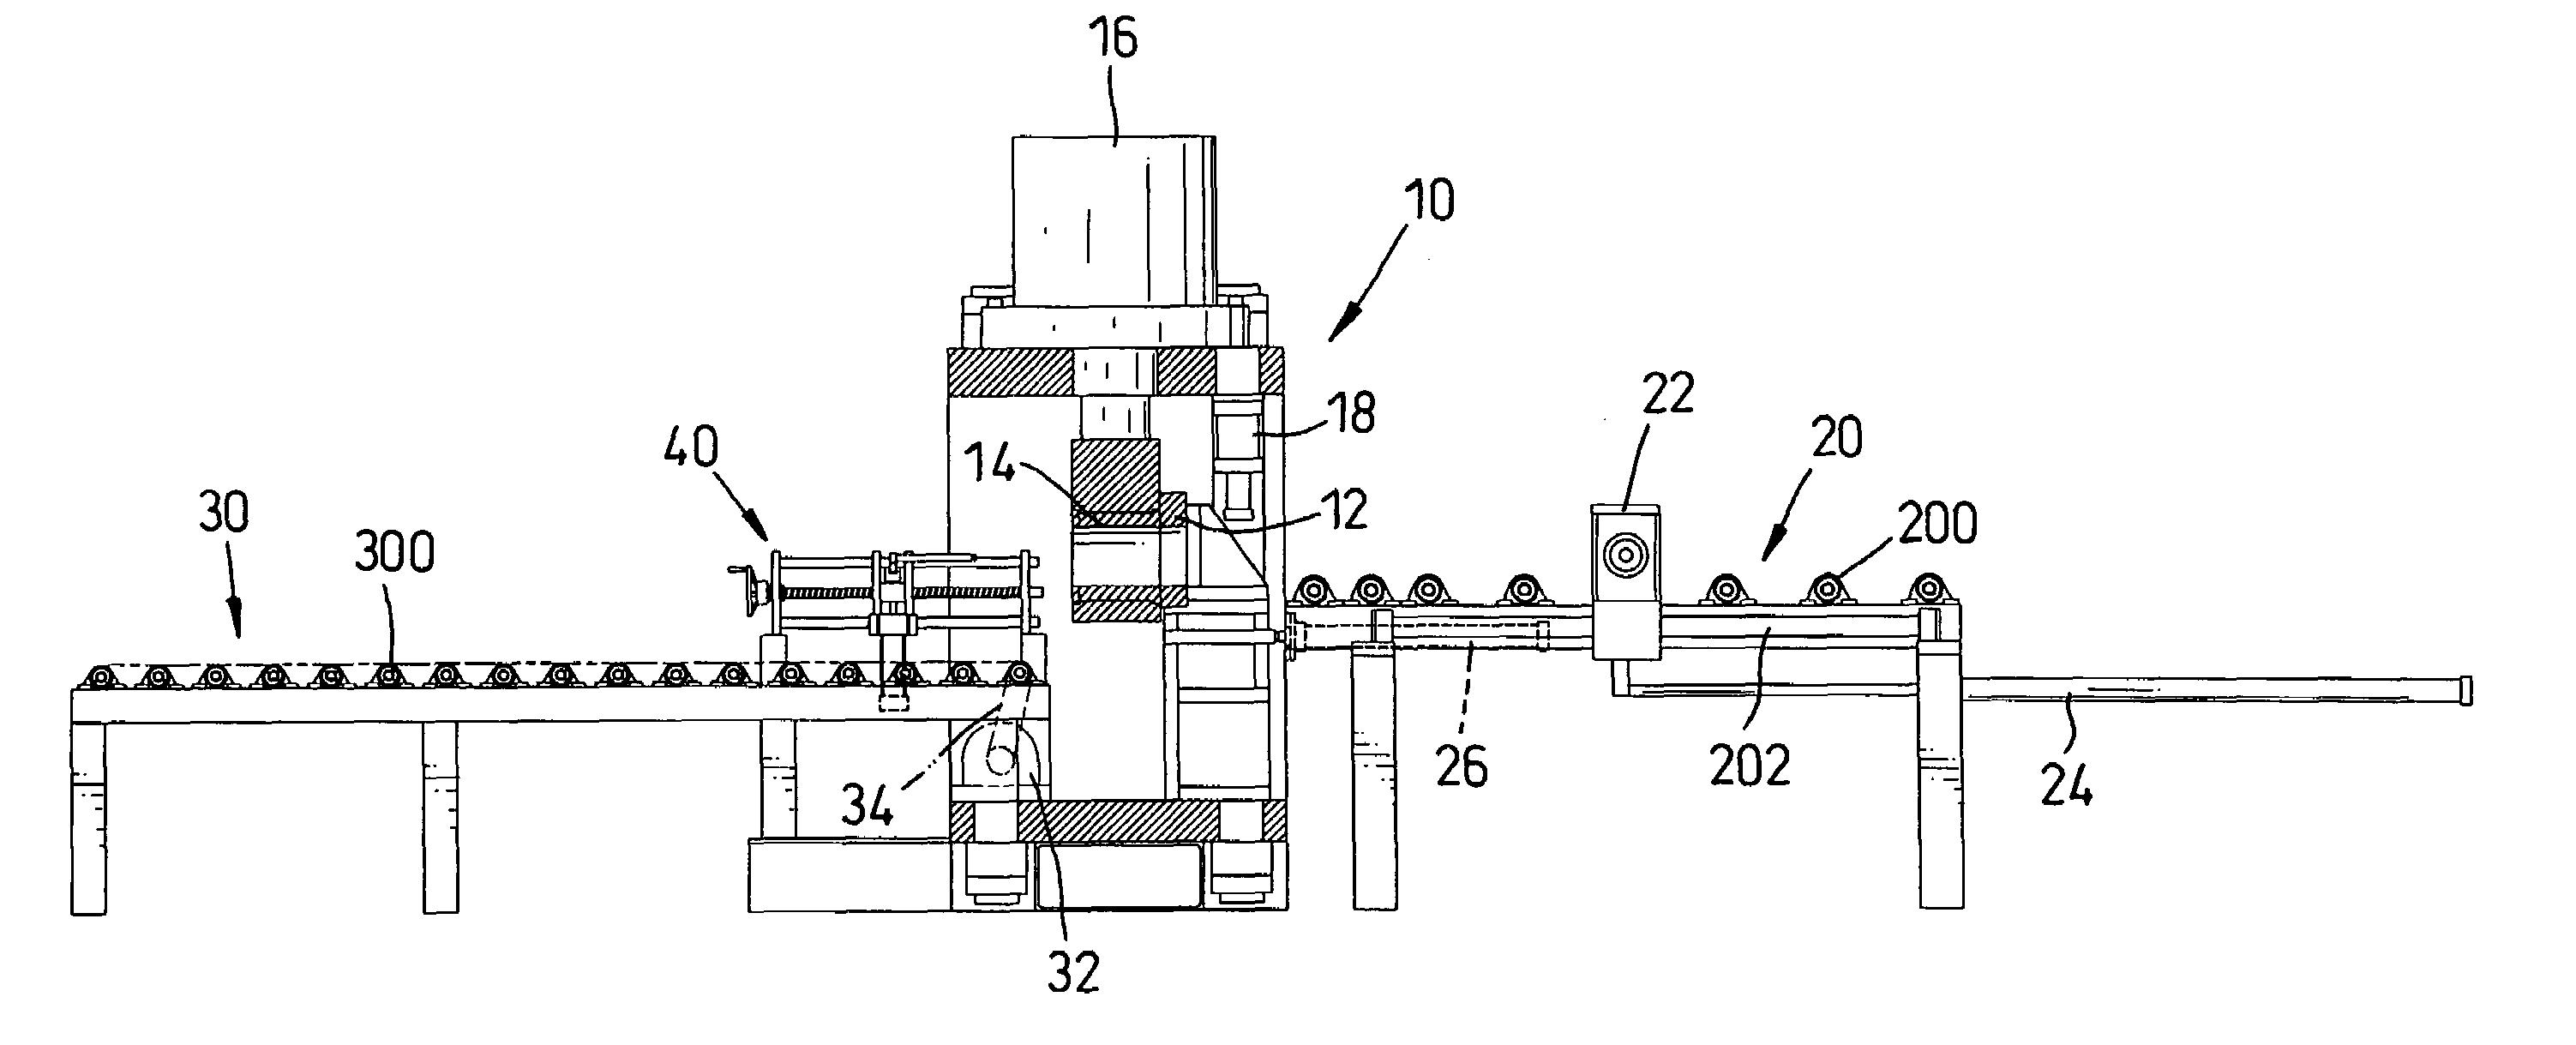 Hydraulic cutting device for cutting a raw aluminum material